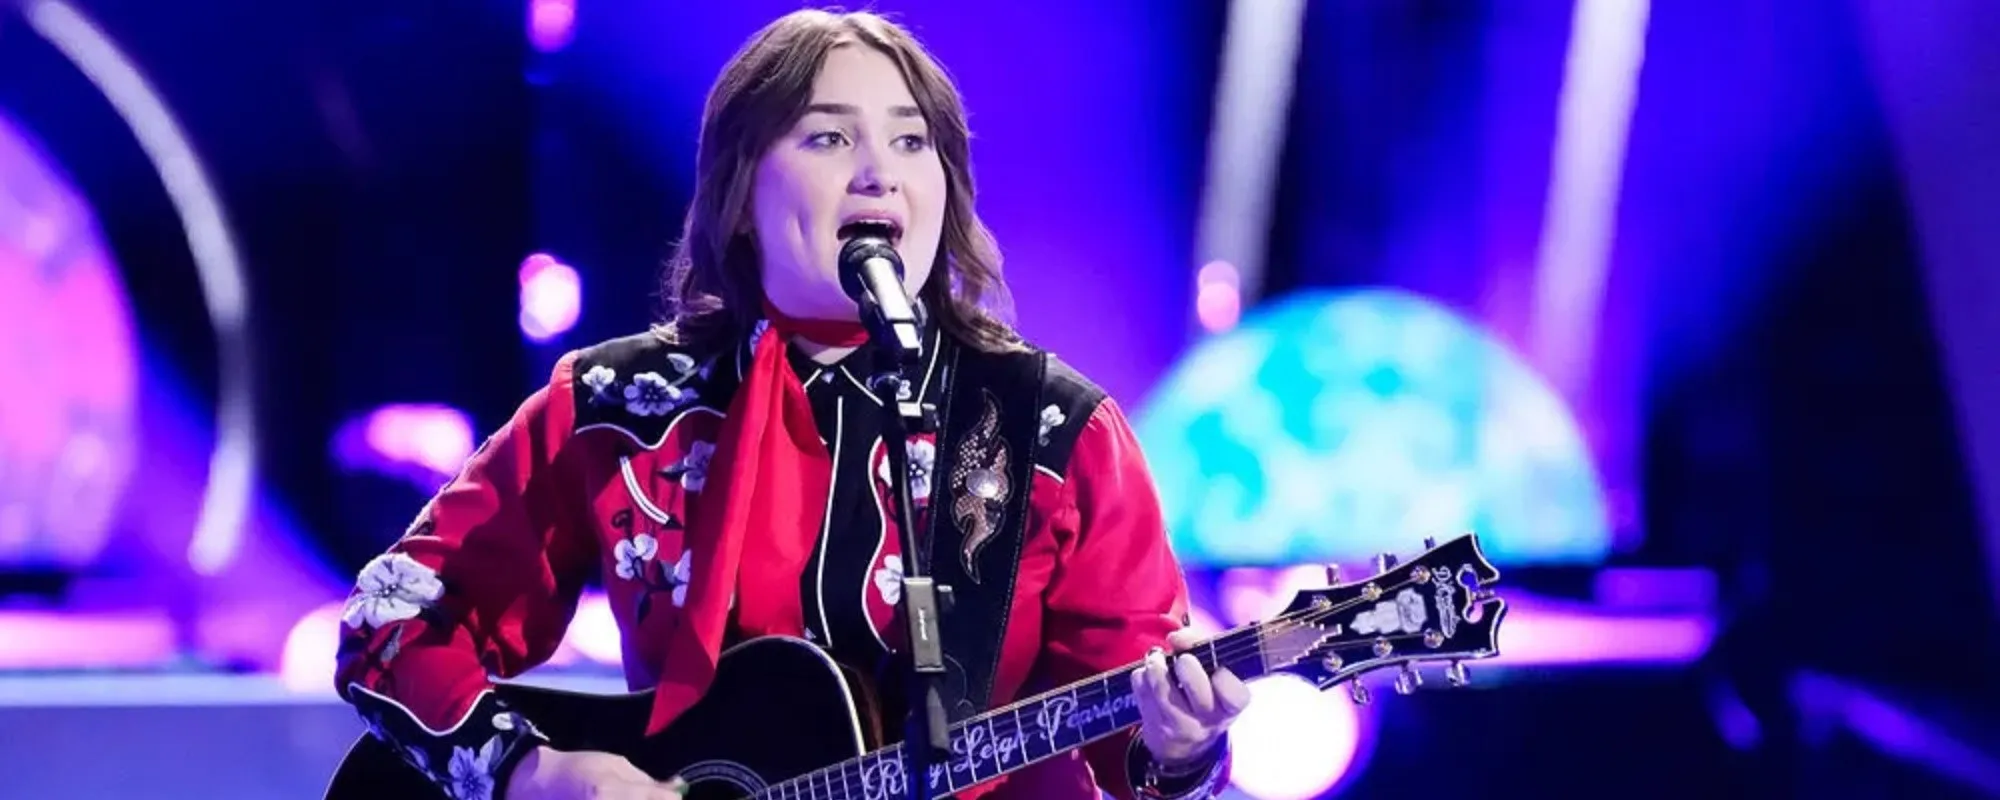 Ruby Leigh Reveals That She Auditioned for ‘The Voice’ as a Joke